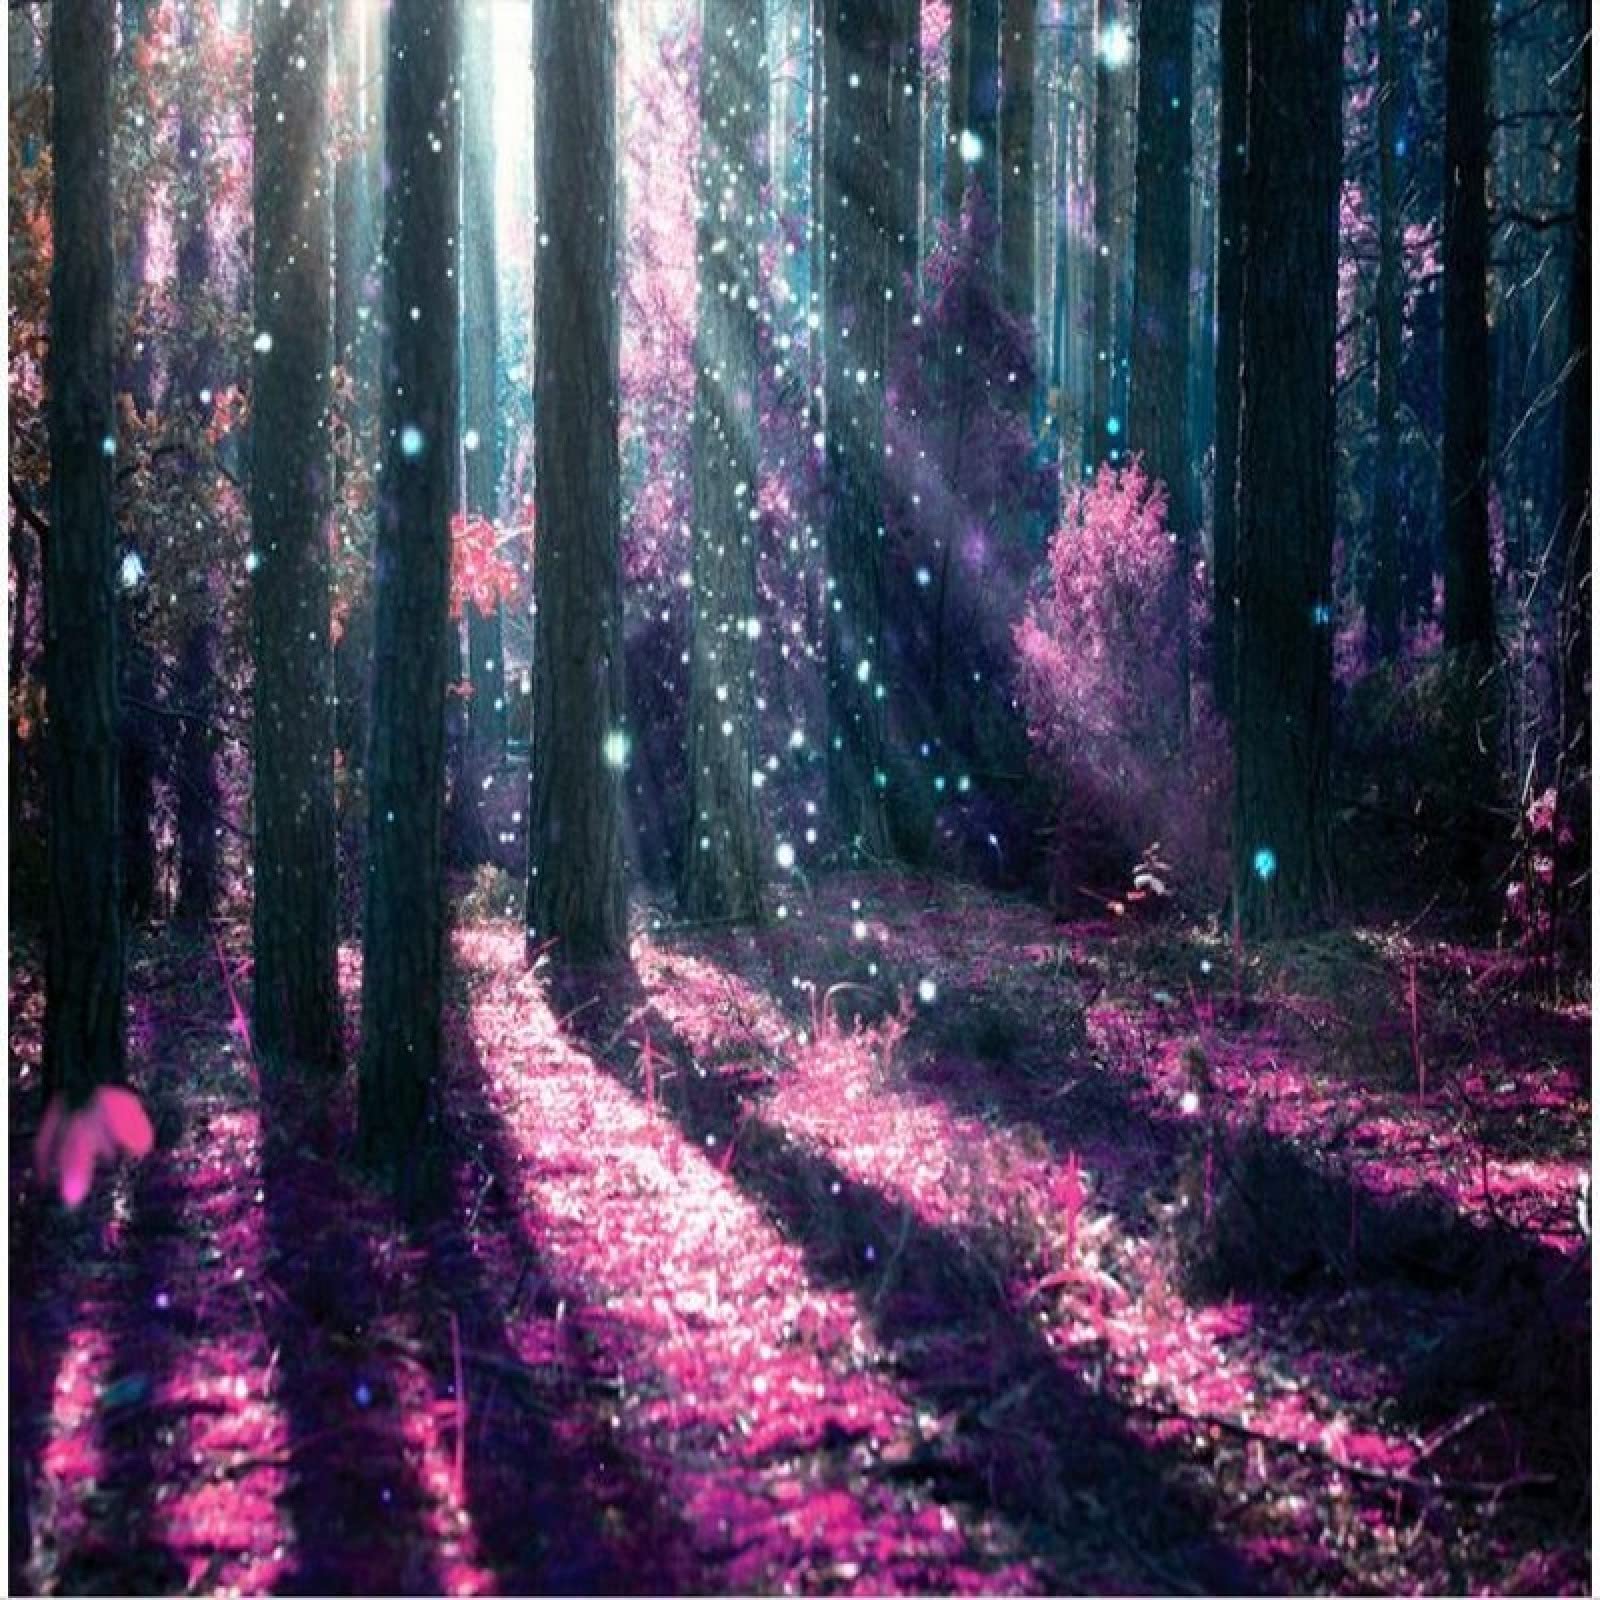 A forest with purple lights and stars - Forest